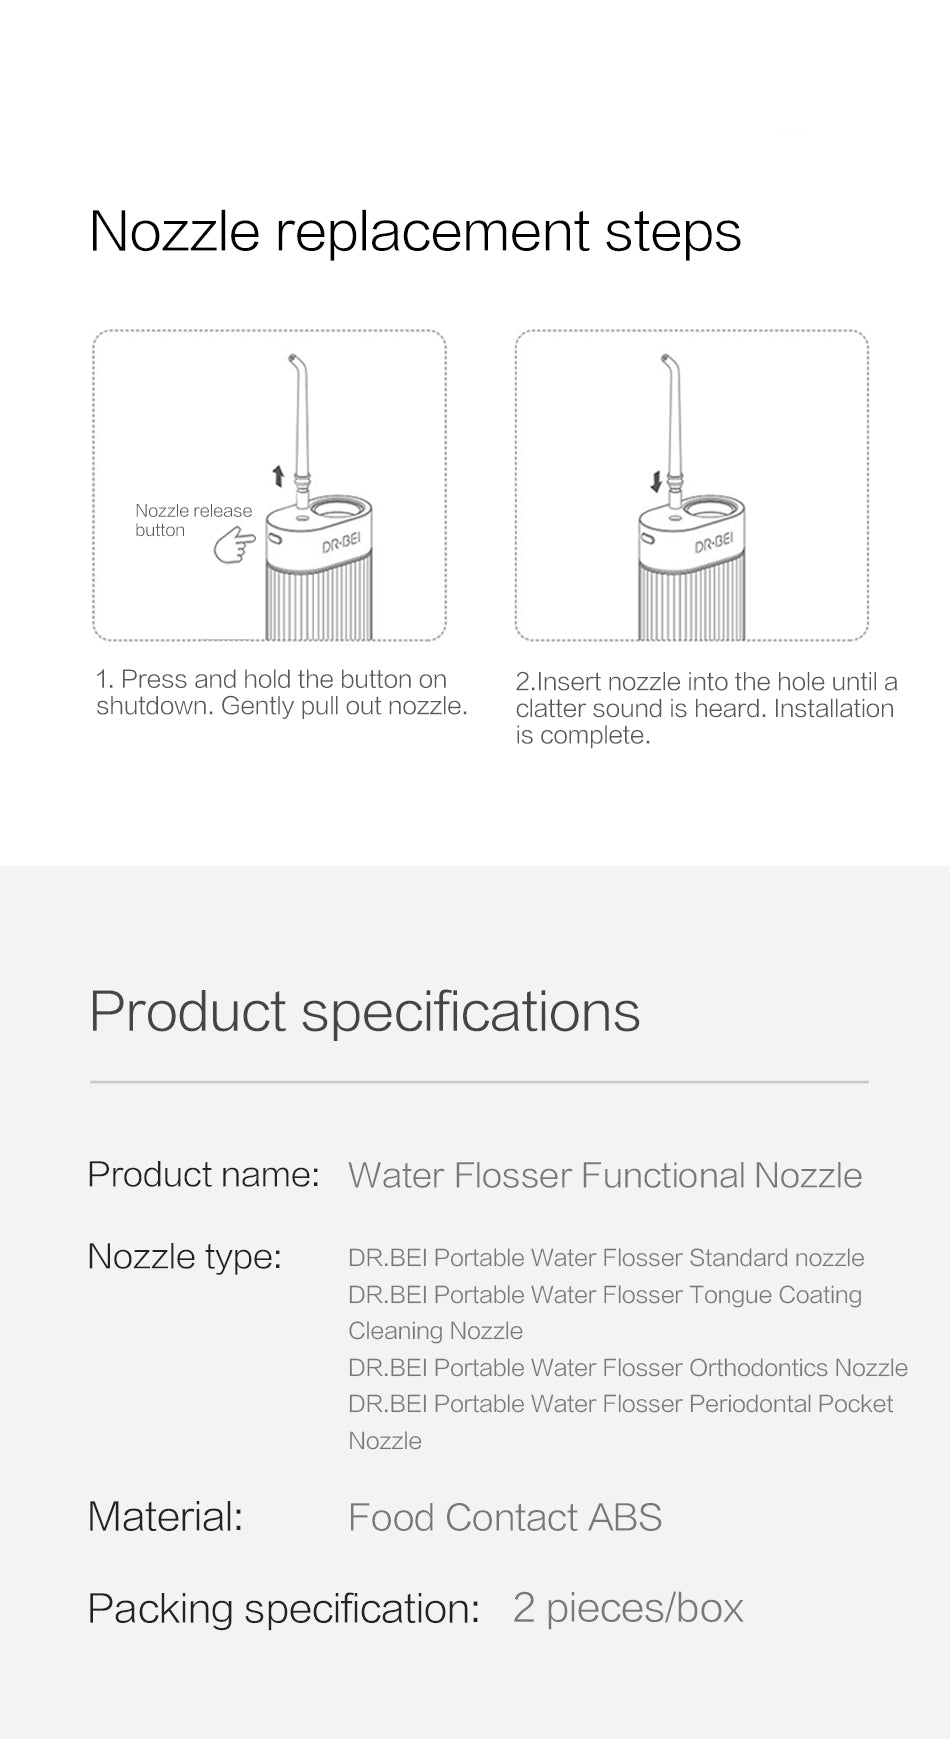 DR.BEI GF3/F3 Portable Water Flosser Nozzle, 2 Pieces  Xiaomi Youpin DR.BEI Oral Irrigator Cleaning Nozzles 2pcs for DR.BEI GF3 Dental Teeth Cleaning Machine Standard Tongue Periodontal Irrigator Nozzles